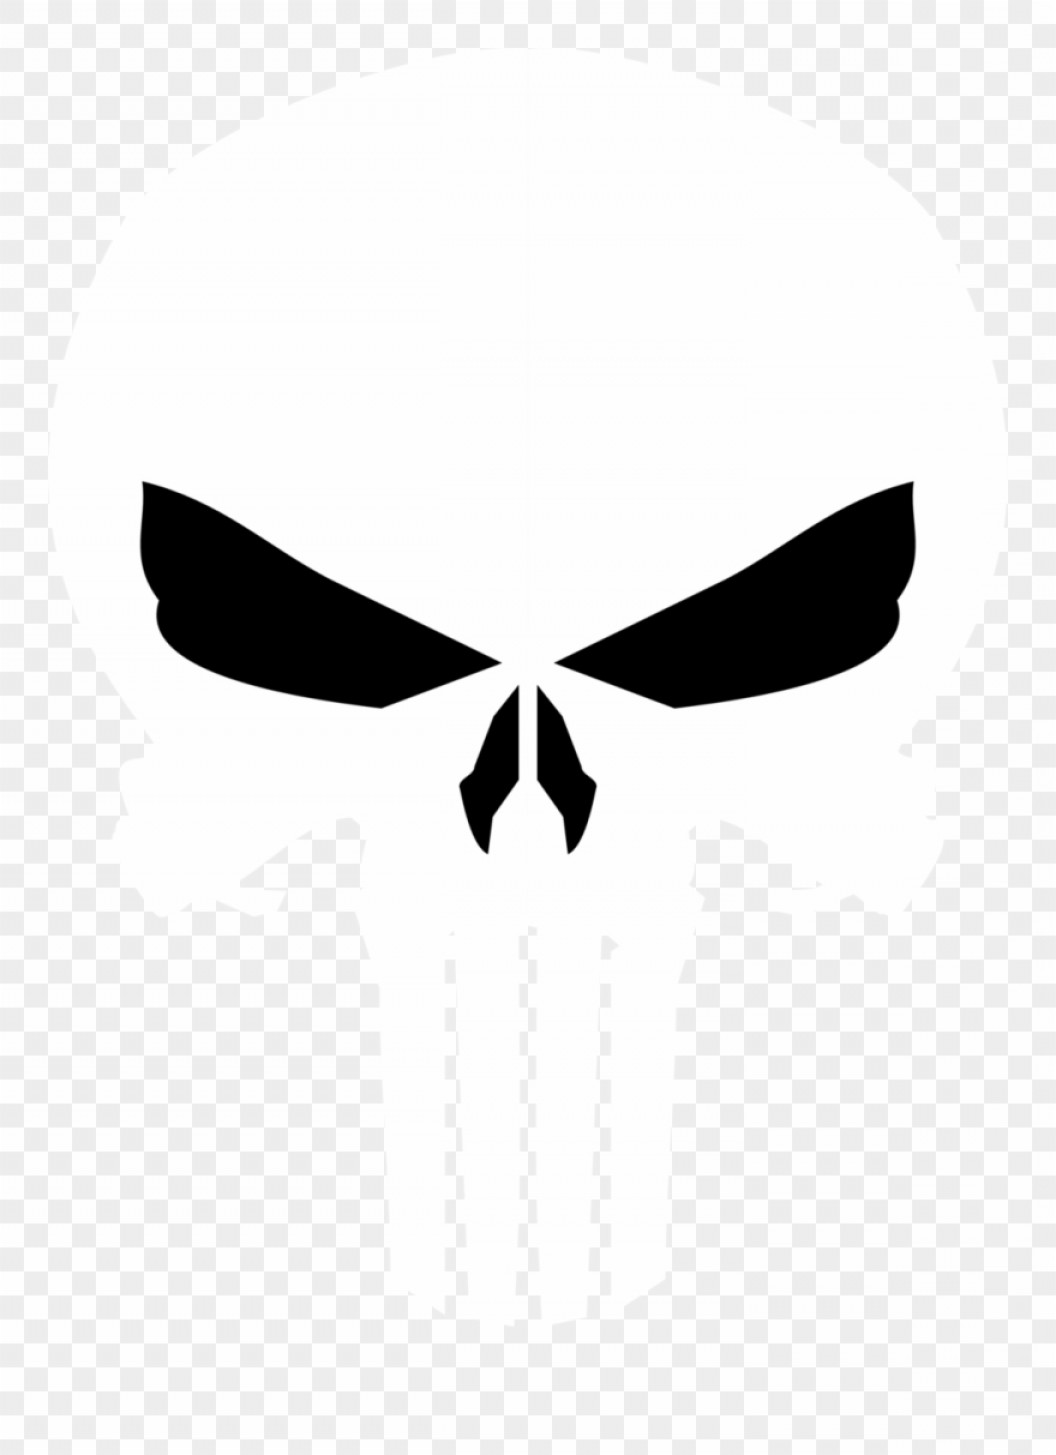 4679 Punisher Skull Vector Images At